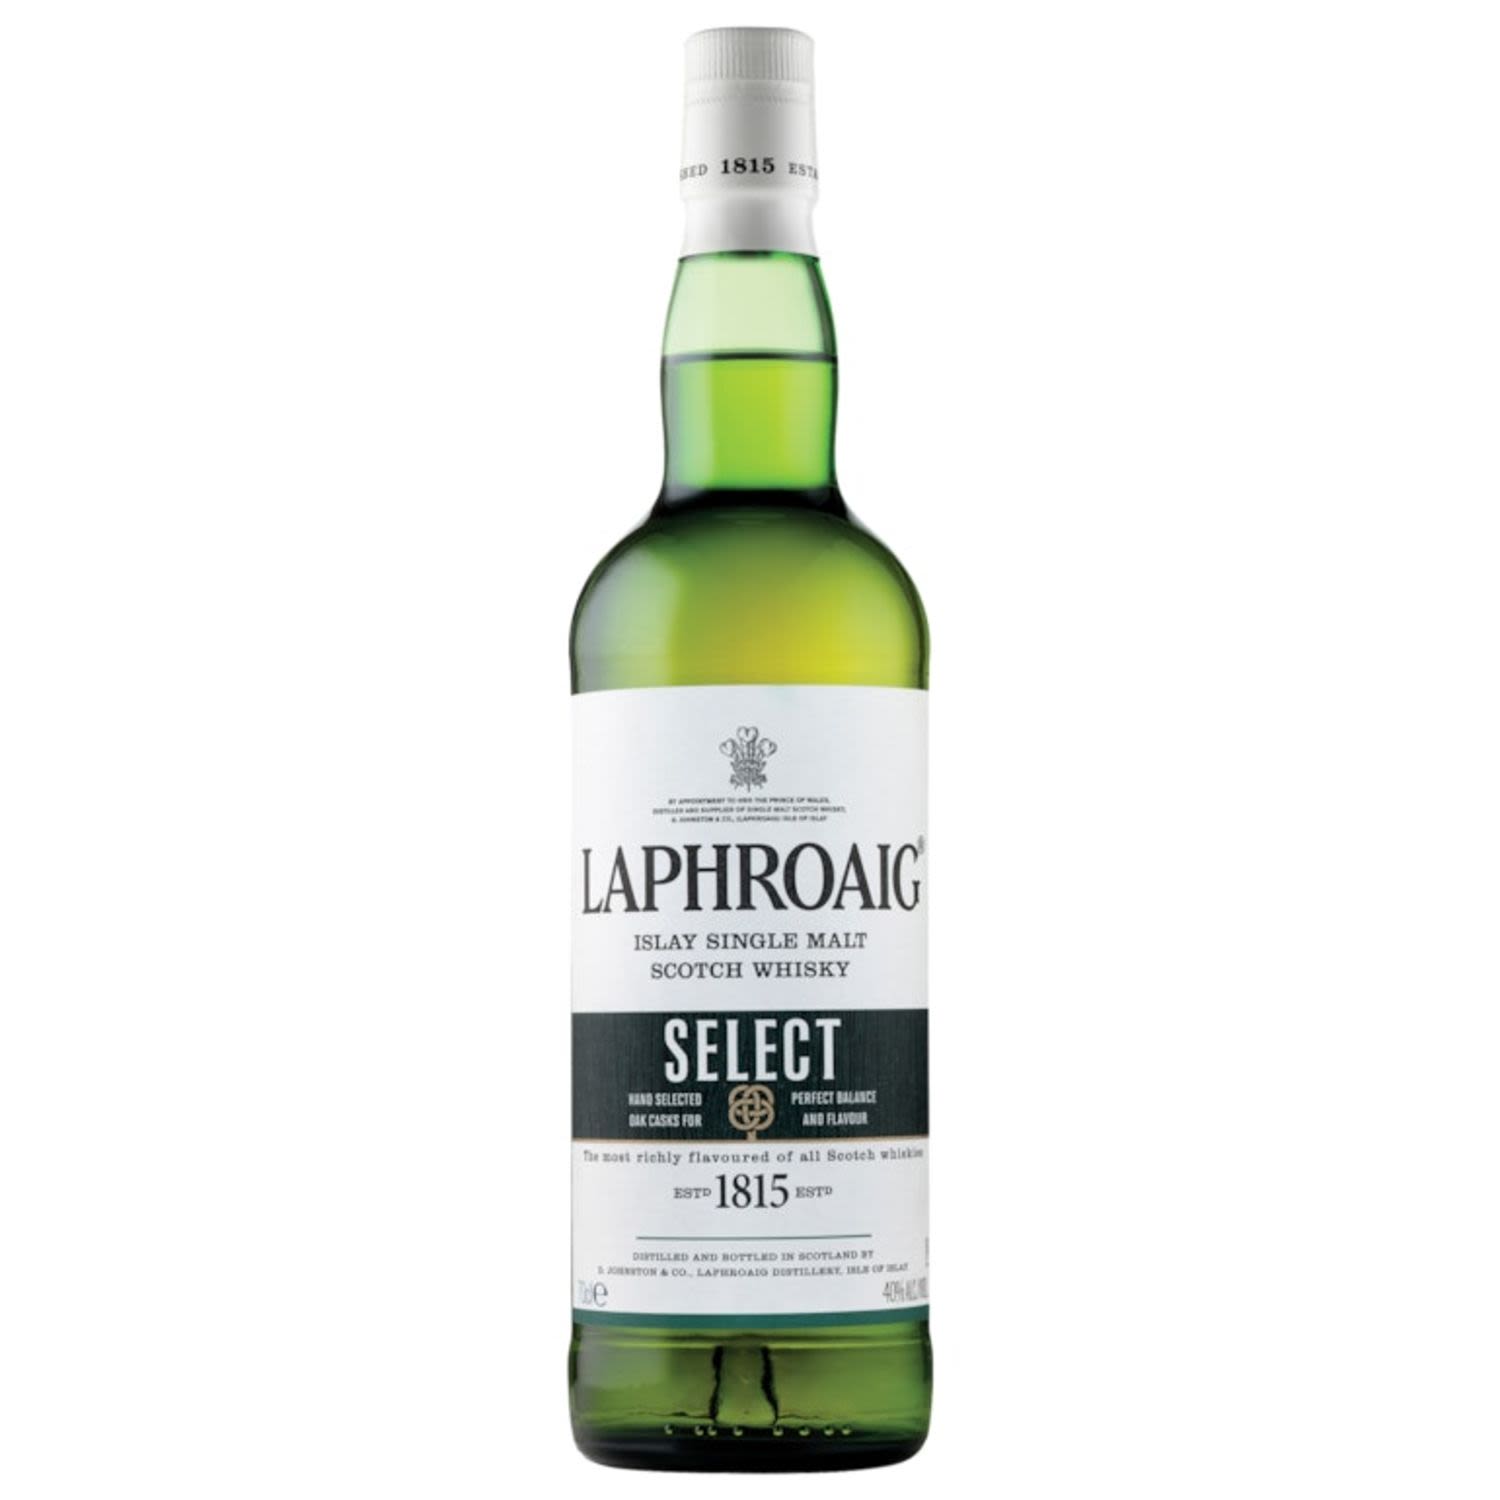 This special Laphroaig is crafted from carefully selected casks from each of the distillery's key styles - with one notable addition. The heart of this single malt is drawn from a final maturation in new American Oak casks, a rarity used for Scotch whisky maturation. With spirit selected by the master distiller from Quarter Cask, PX Cask and Triple Wood (European Oak casks) and a final addition of 10 Year Old, the whisky represents a subtle blending of peat, oak and sweetness. This is a full-bodied expression, featuring Laphroaig's trademark 'peat reek' matched by an additional layer of complexity and depth brought about by the fusion of the maturation styles and different oaks.<br /> <br />Alcohol Volume: 40.00%<br /><br />Pack Format: Bottle<br /><br />Standard Drinks: 22.1</br /><br />Pack Type: Bottle<br /><br />Country of Origin: Scotland<br />